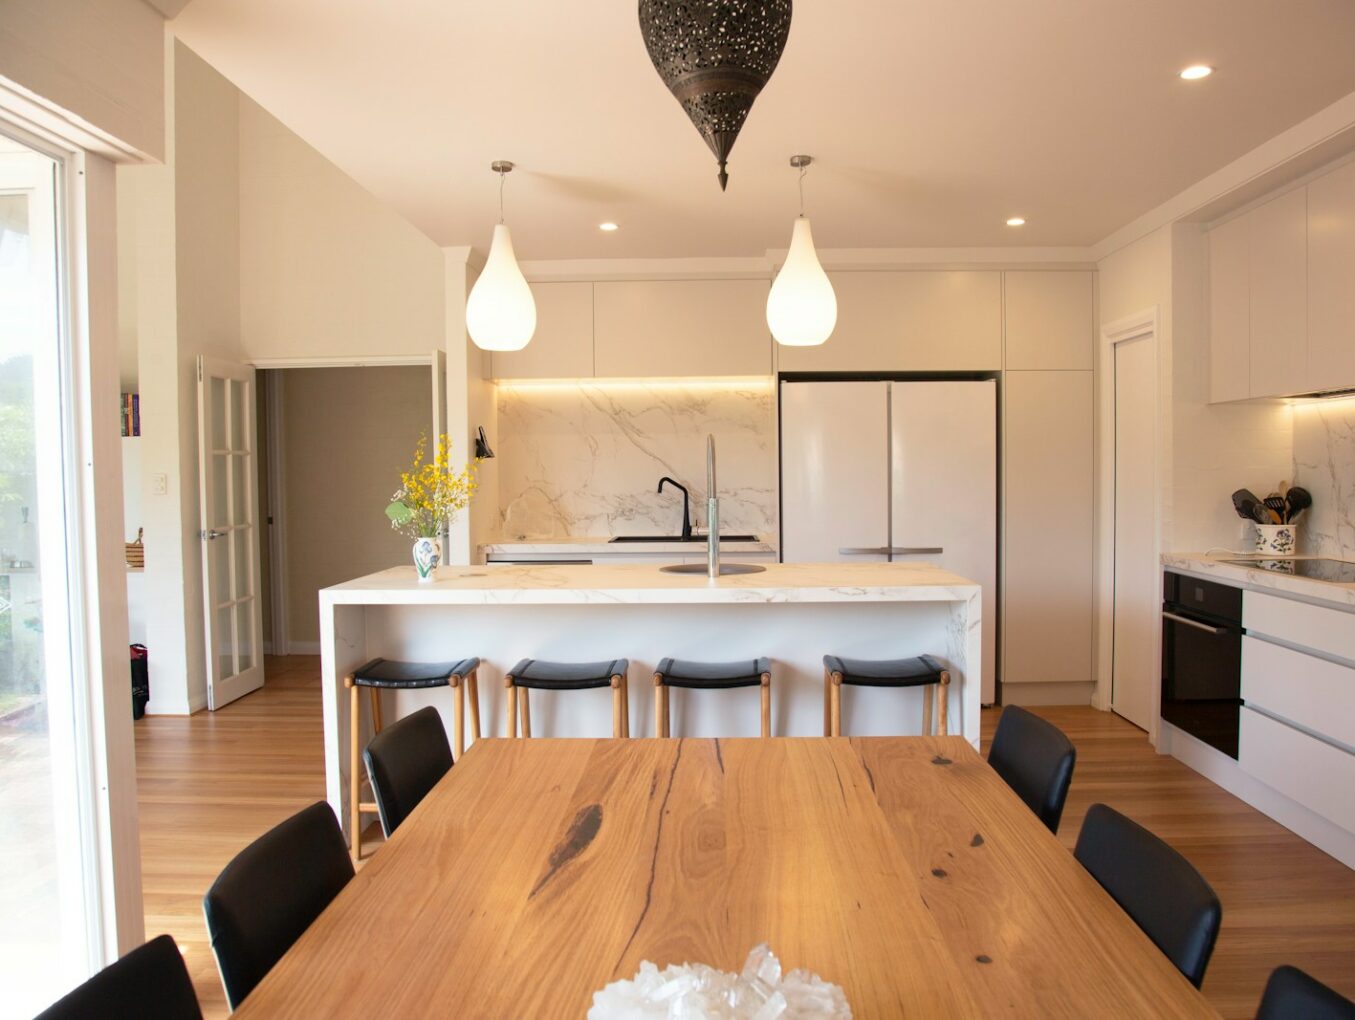 Kitchen Expansions in Burbank, CA: Transforming Your Cooking Space with a Room Addition